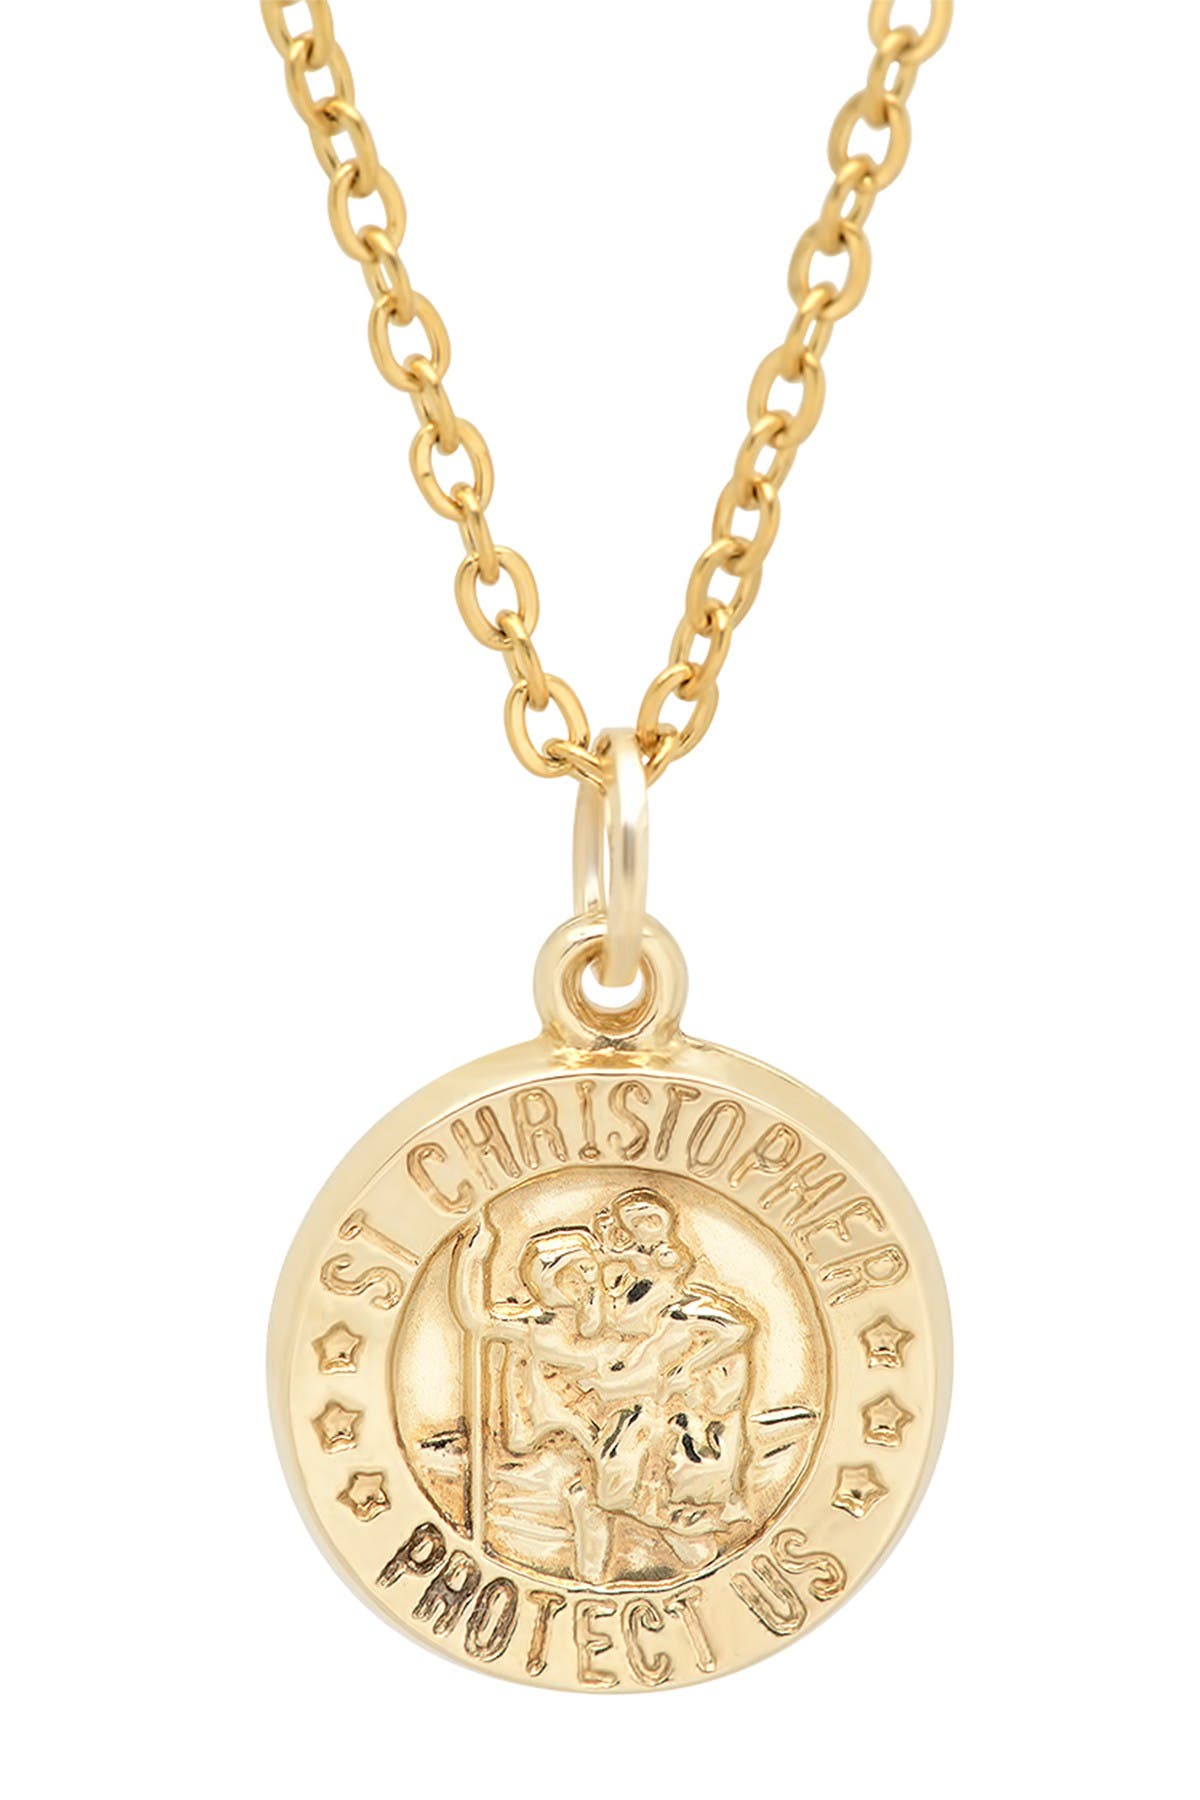 Best Silver Inc. 14k Solid Gold Our Lady Of Christopher Medallion Pendant Necklace